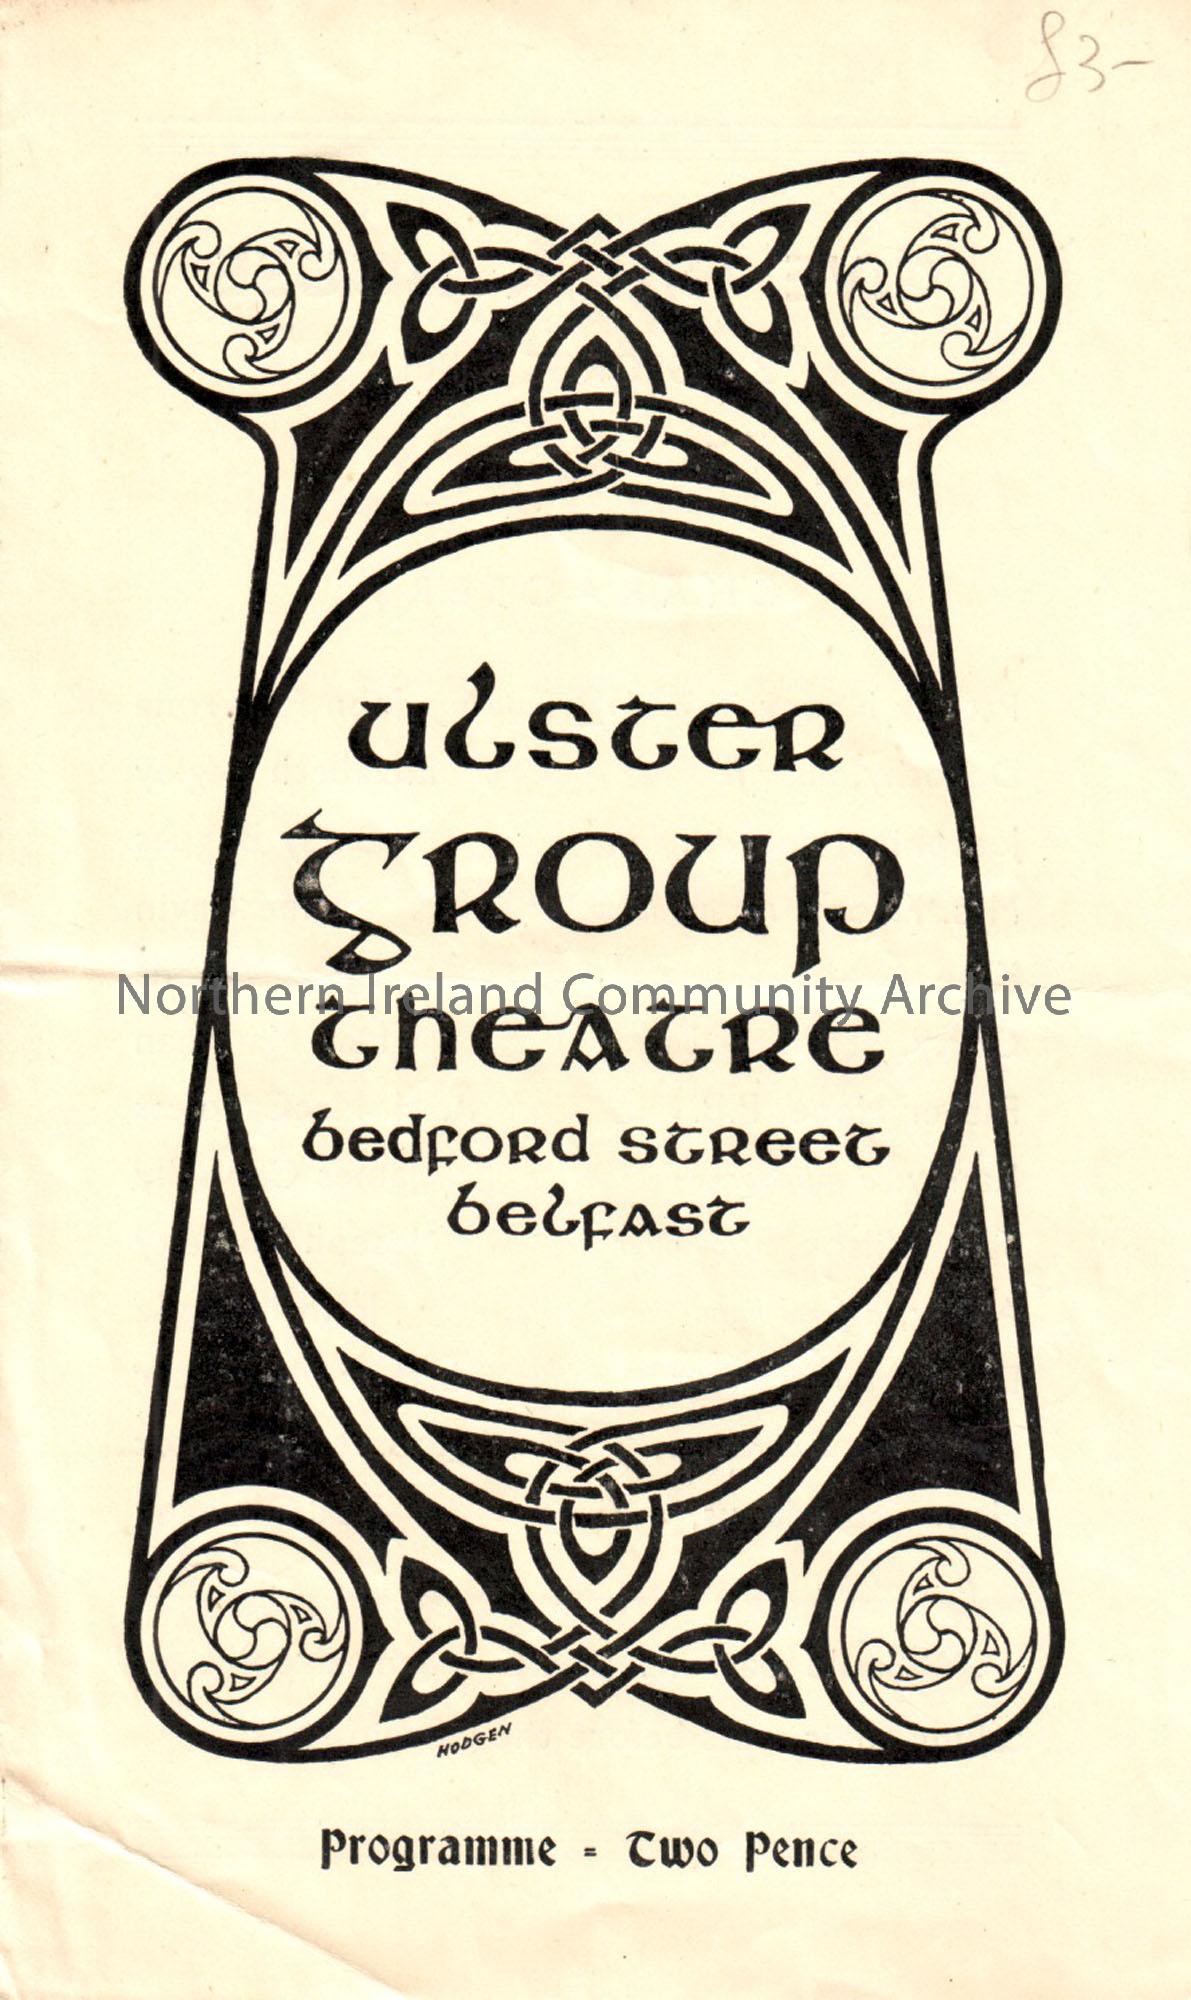 Theatre programme- Ulster Group Theatre perform ‘Give him a house’ by George Shiels. Undated though air raid warning on reverse places it within WWII.